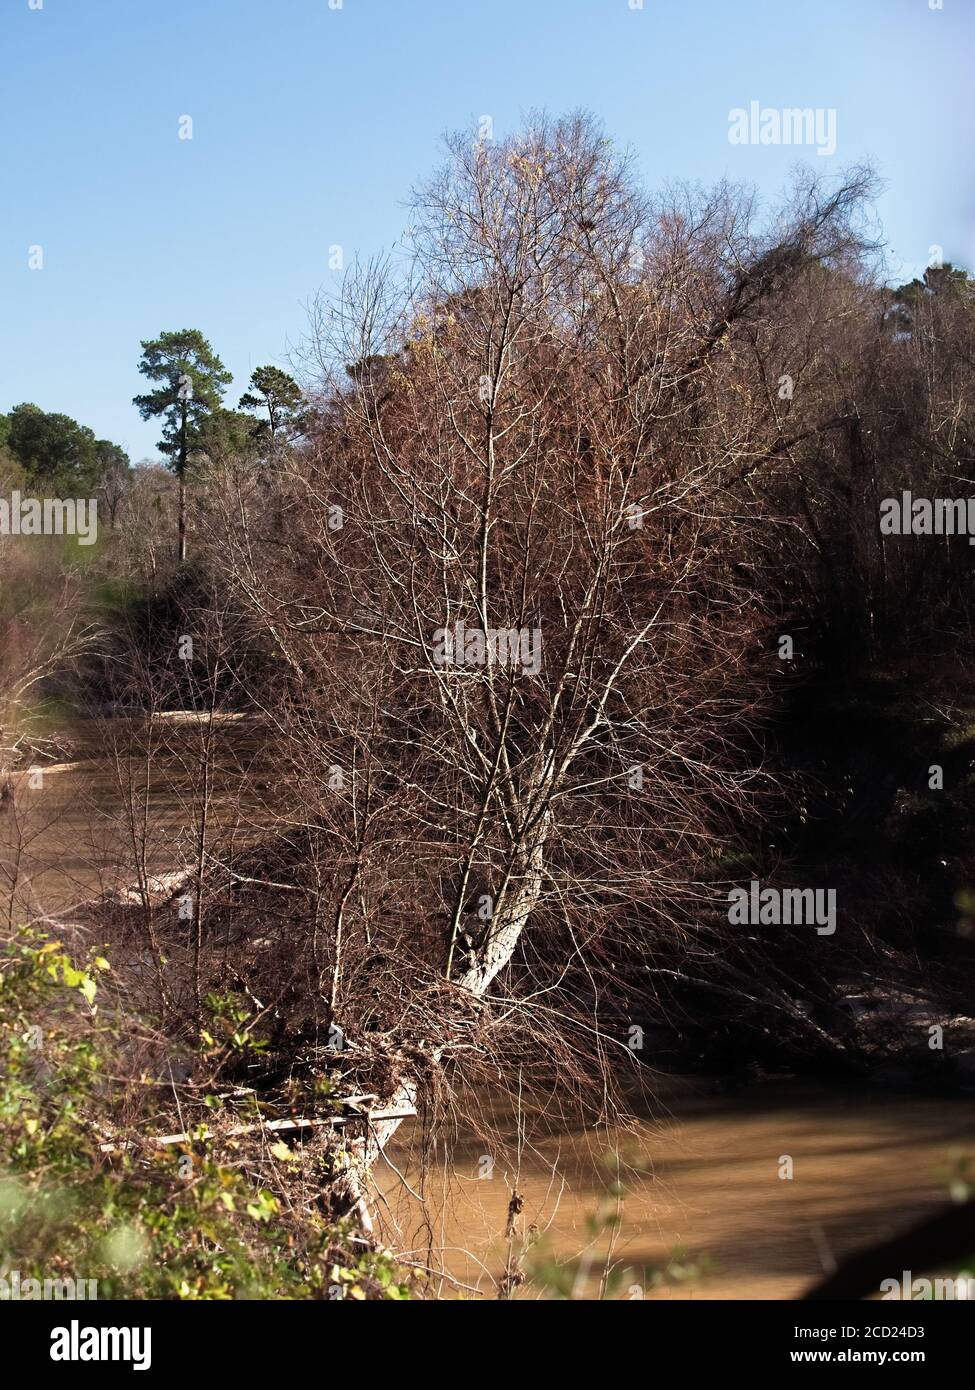 The Woodlands TX USA - 01-20-2020 - Tree over River Im Winter Stockfoto